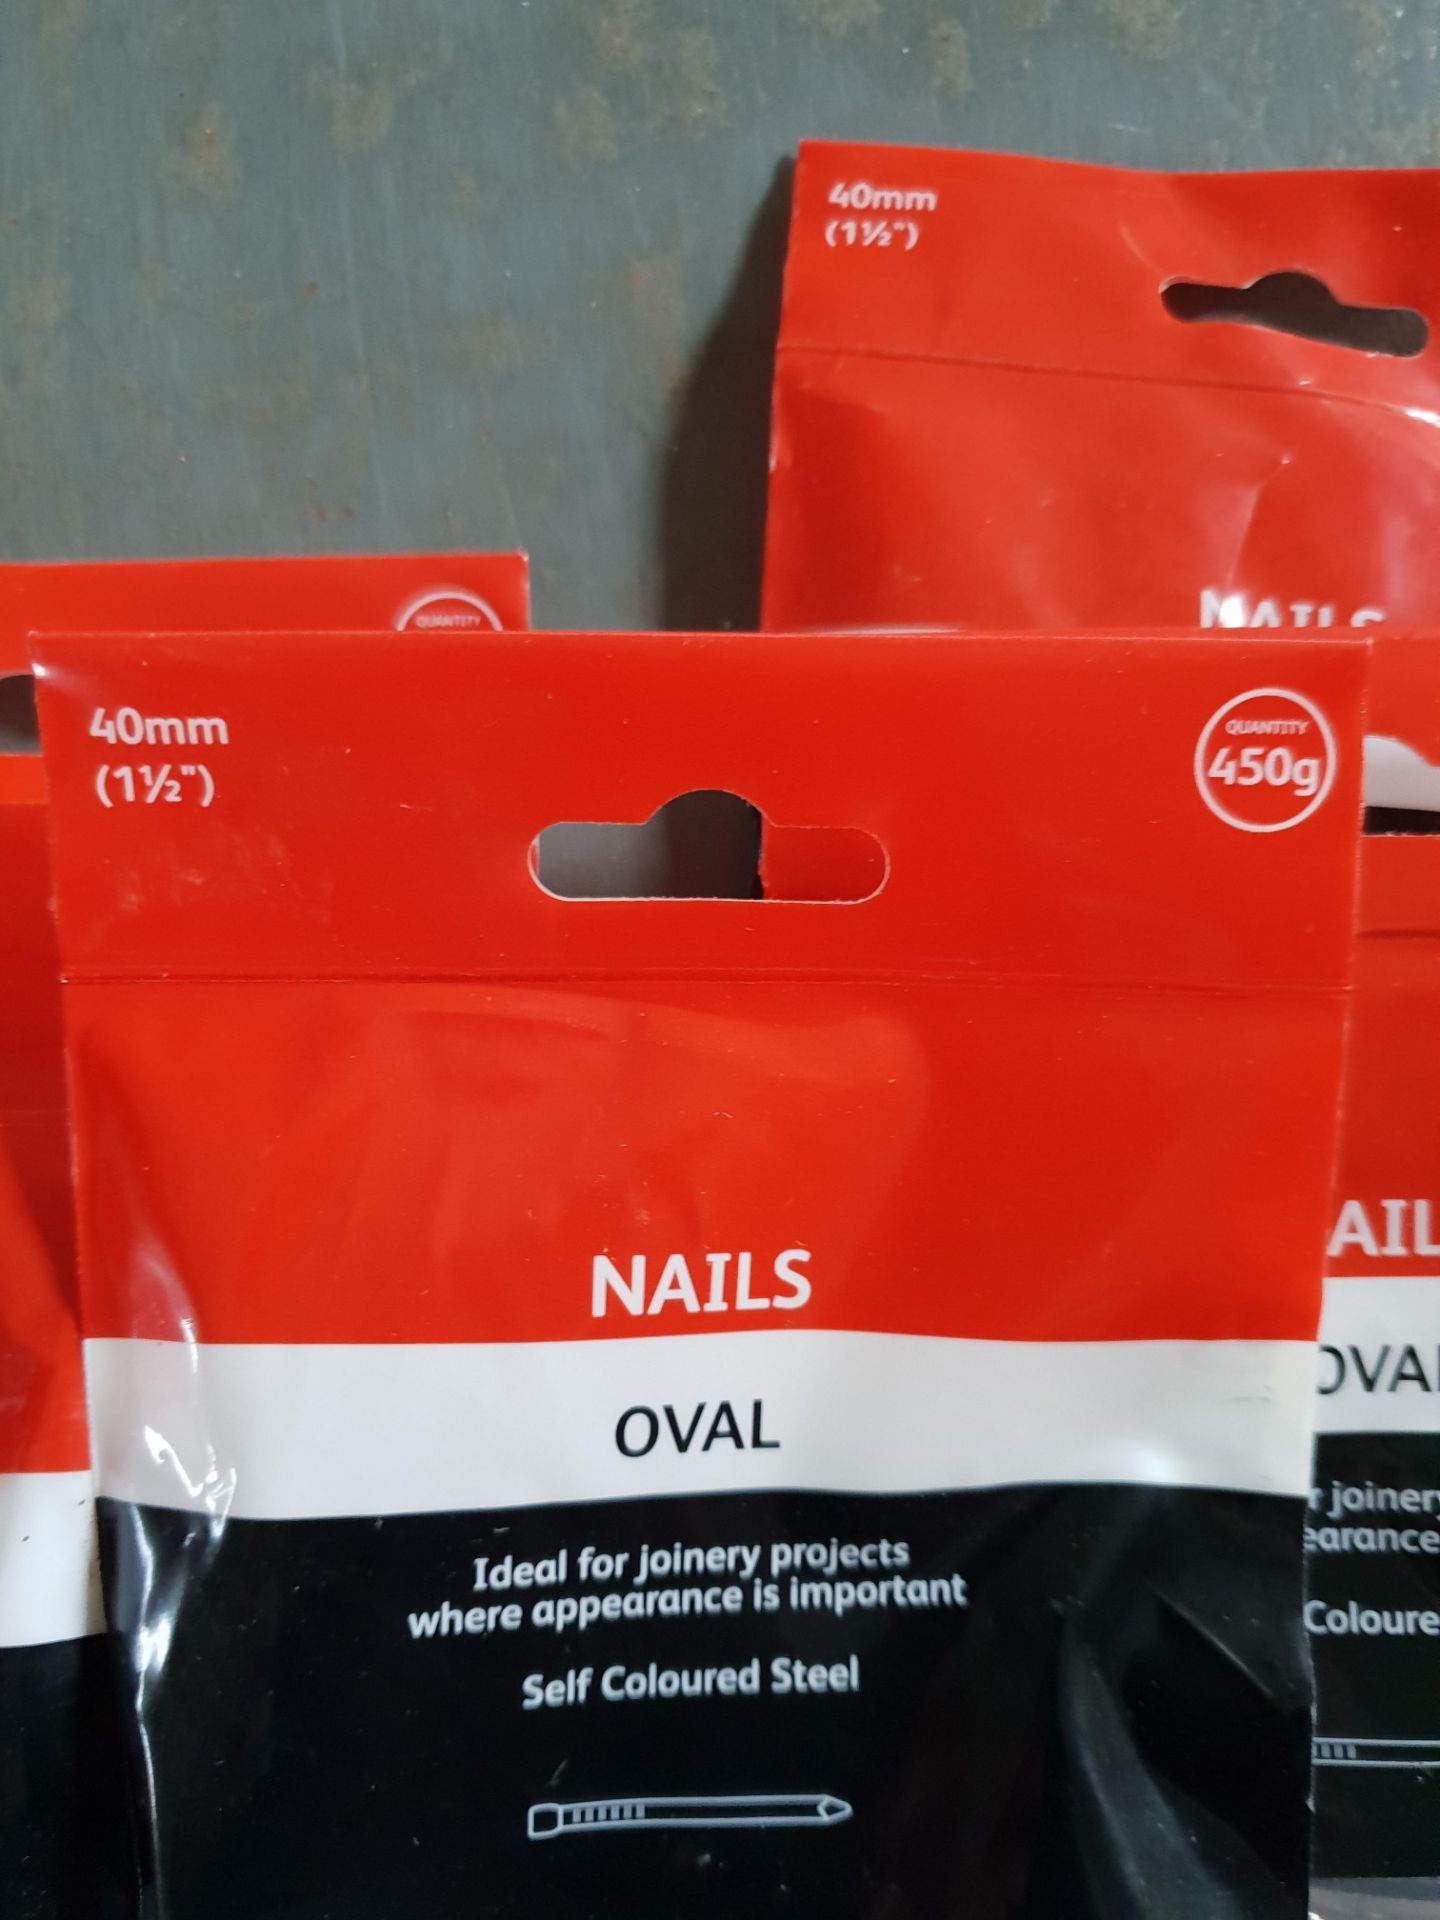 20 packs - 40mm oval nails